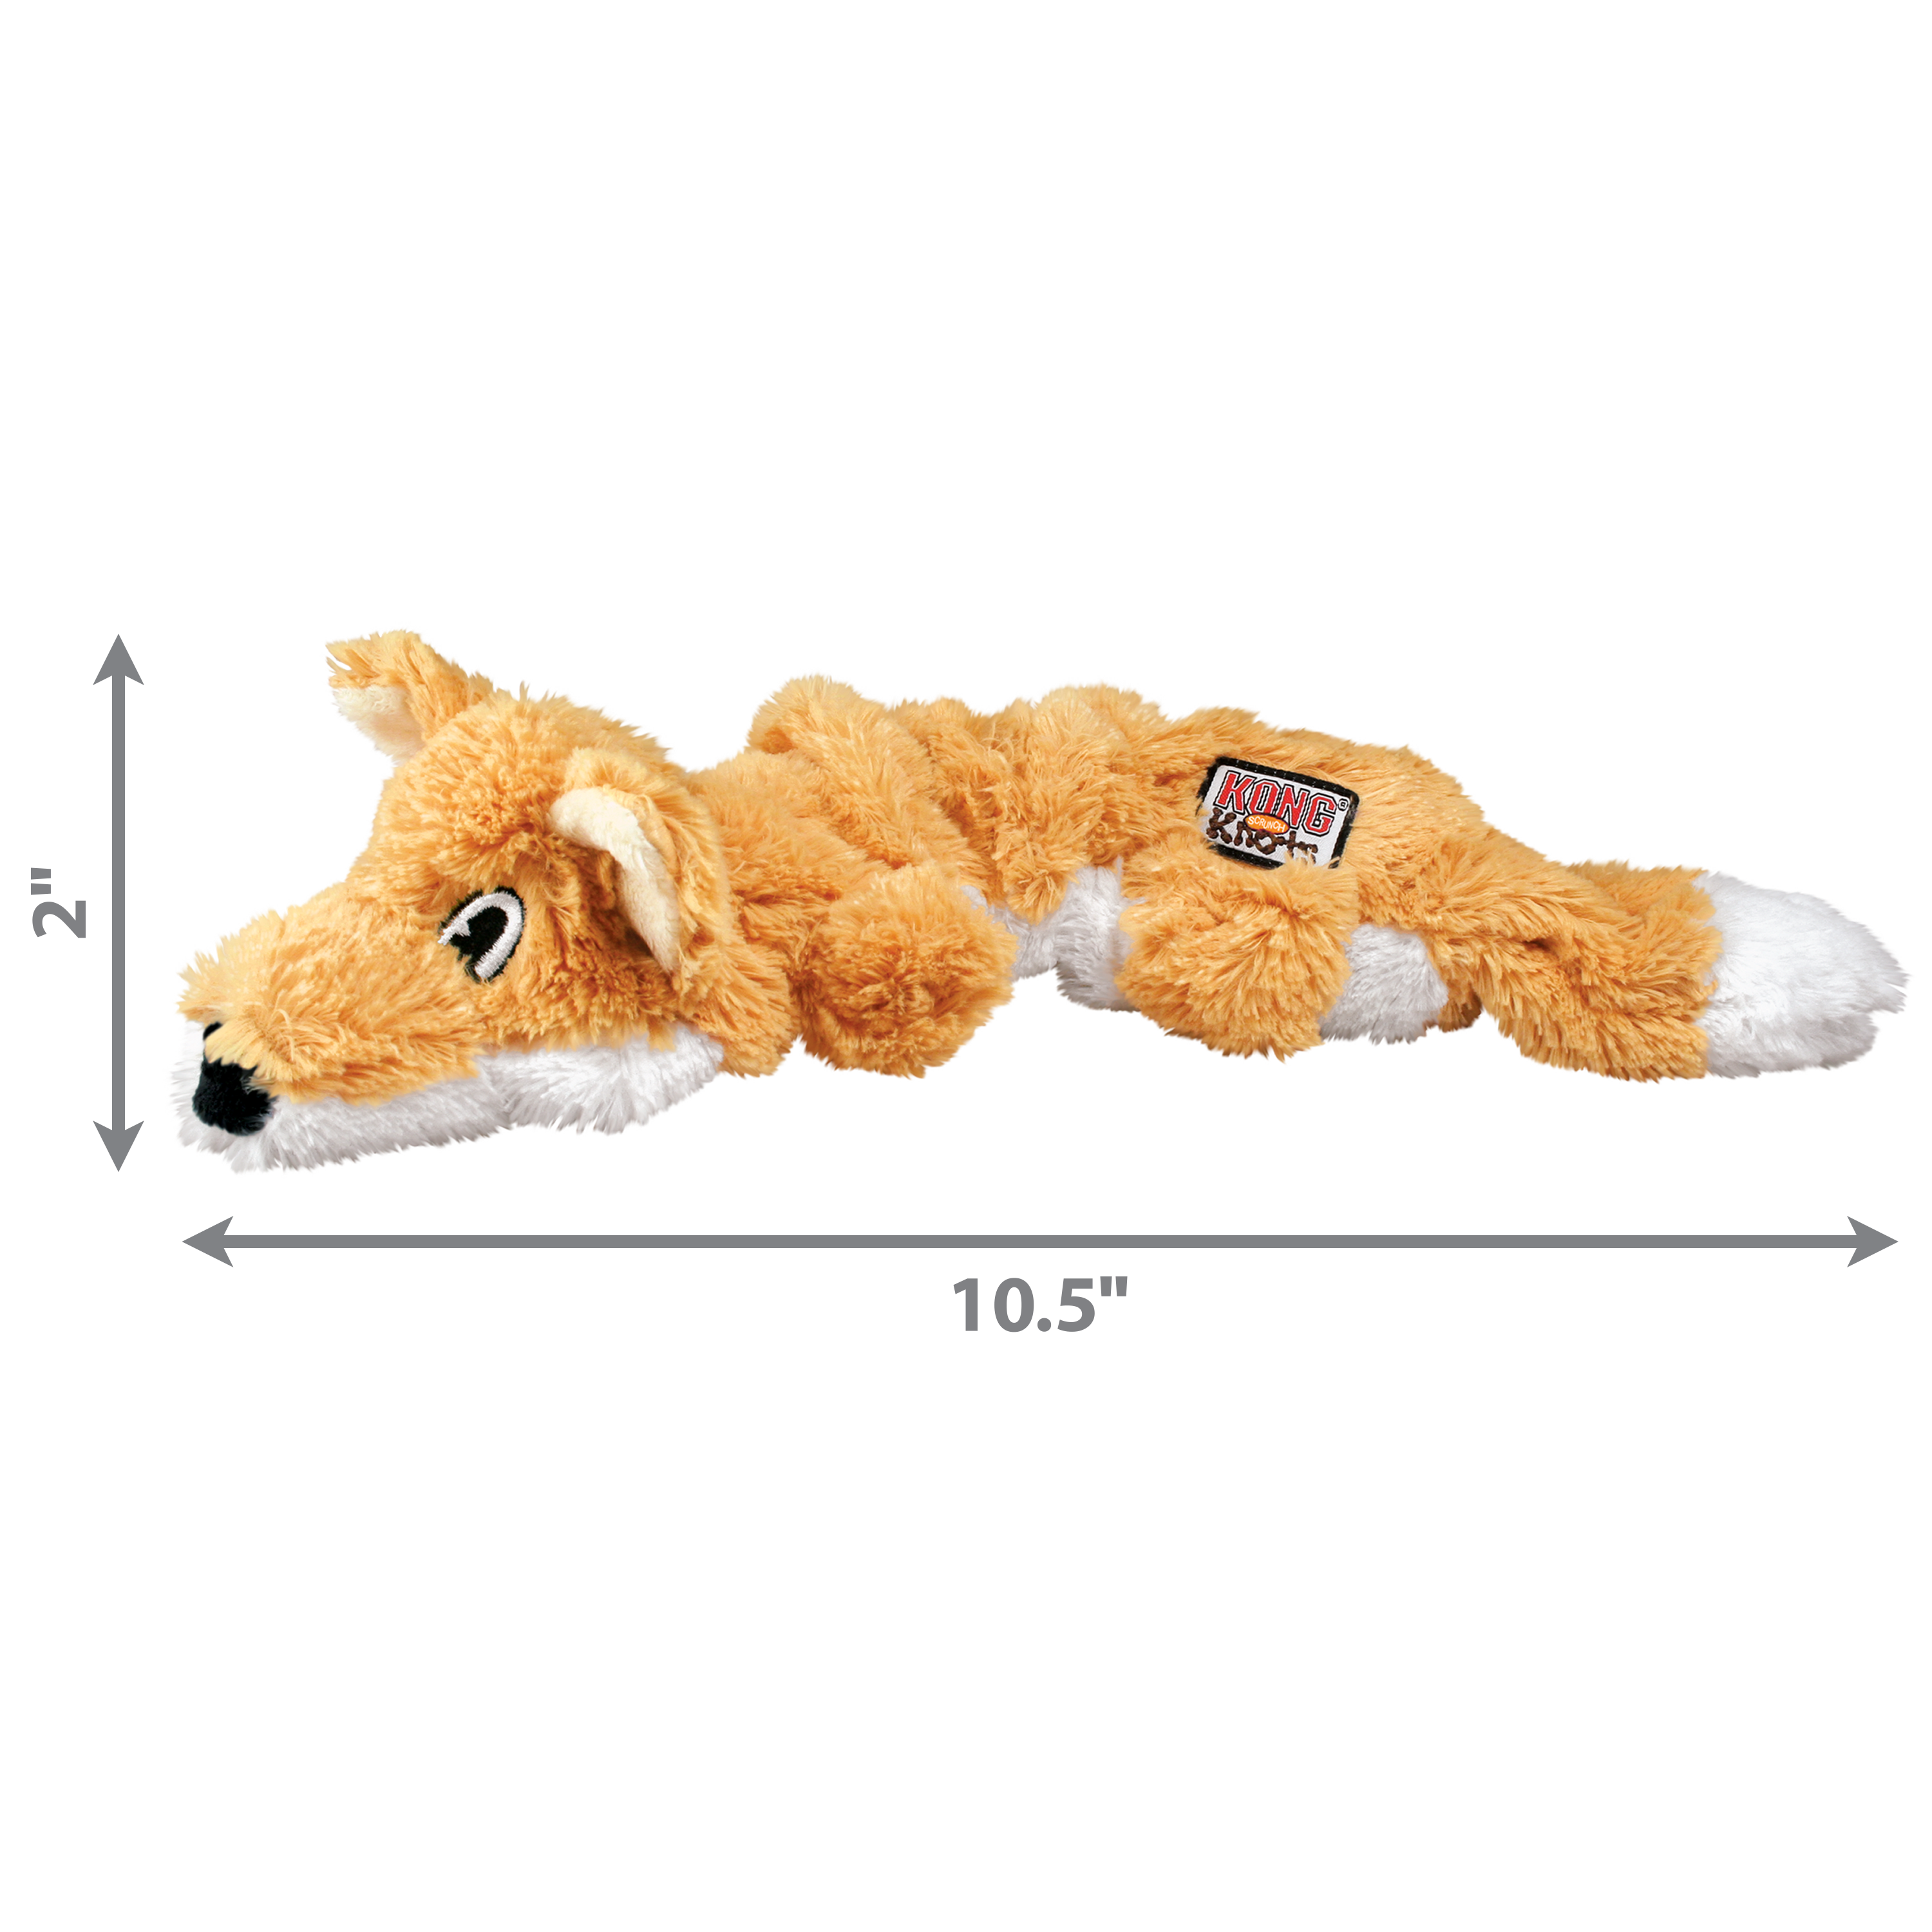 Scrunch Knots Fox dimoffpack product image